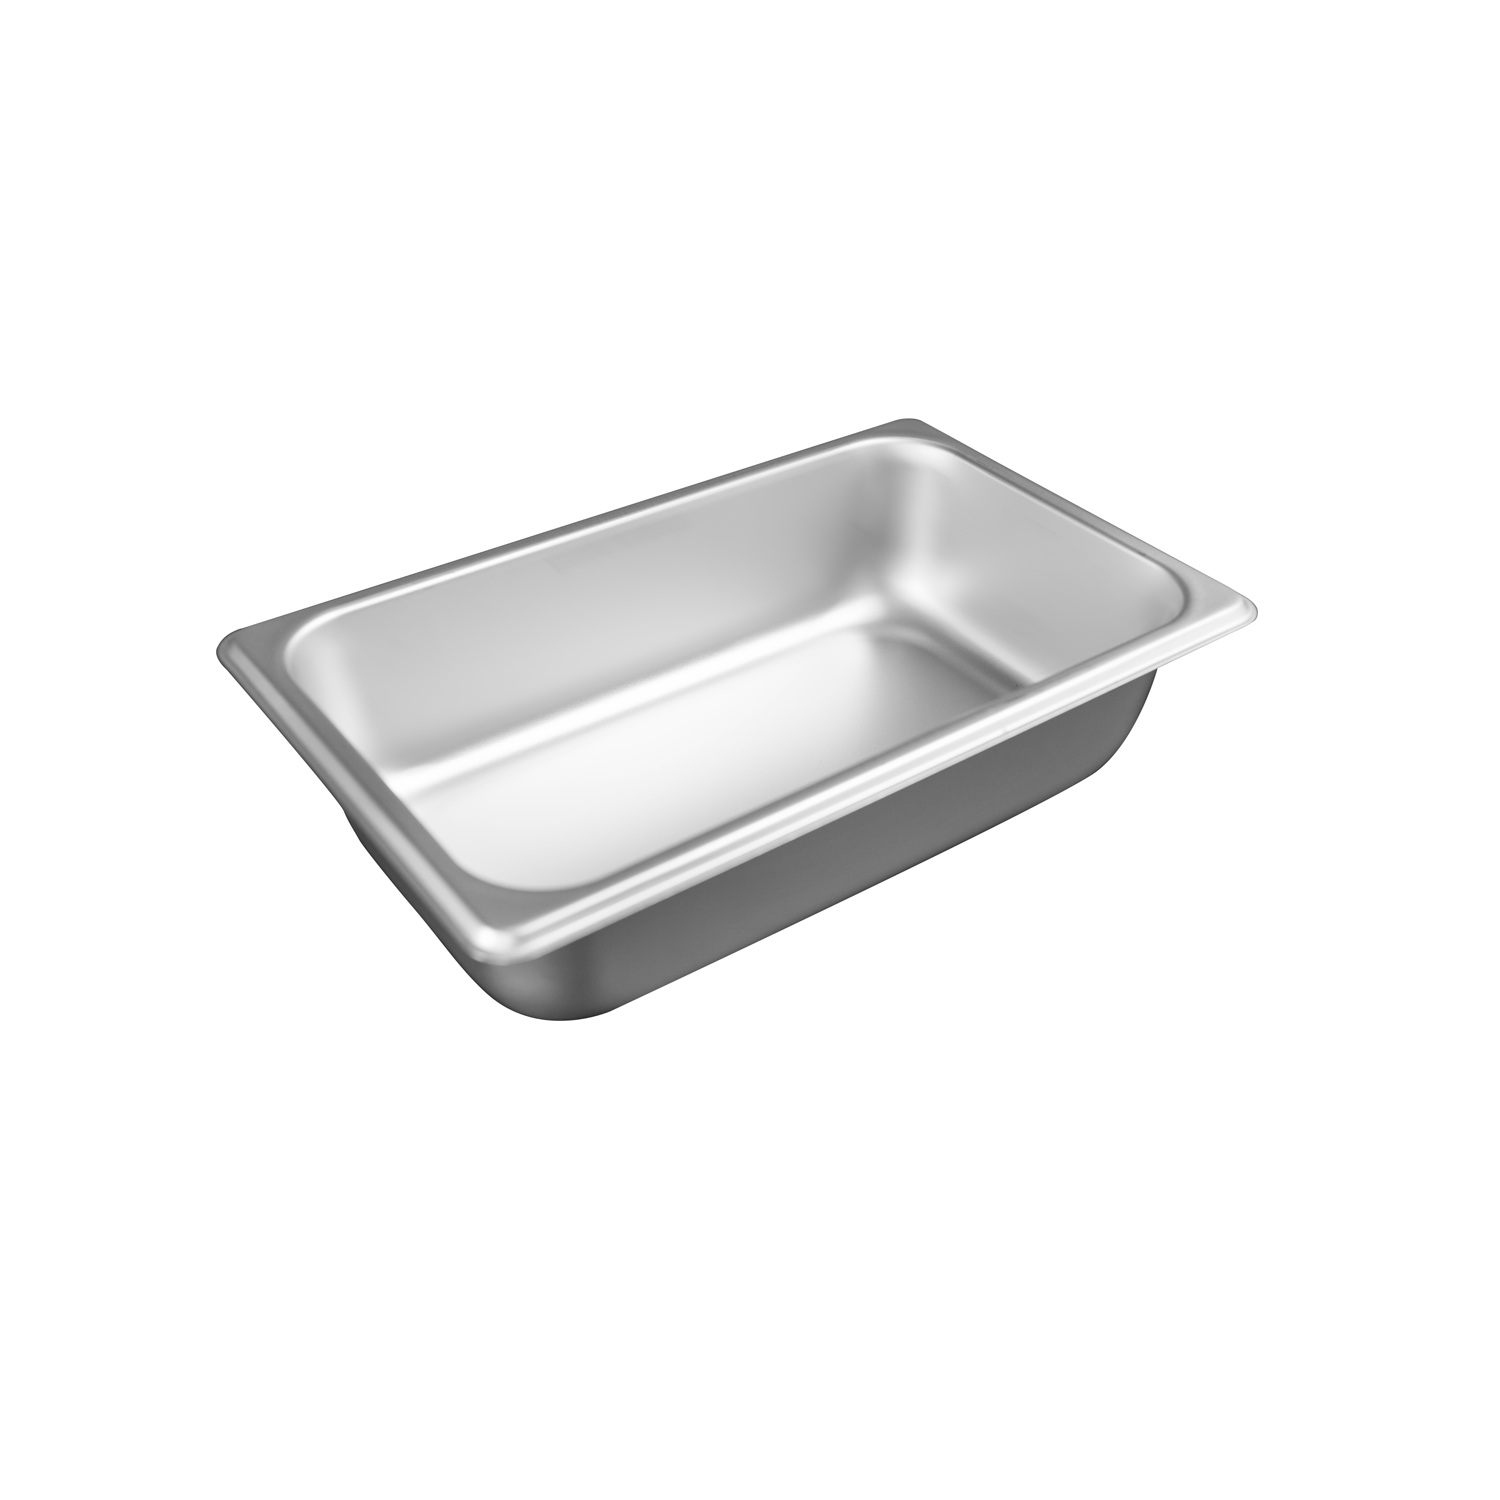 CAC China STPQ-S25-2 1/4 Size 25-Gauge Stainless Steel Steam Pan, 2-1/2"Deep